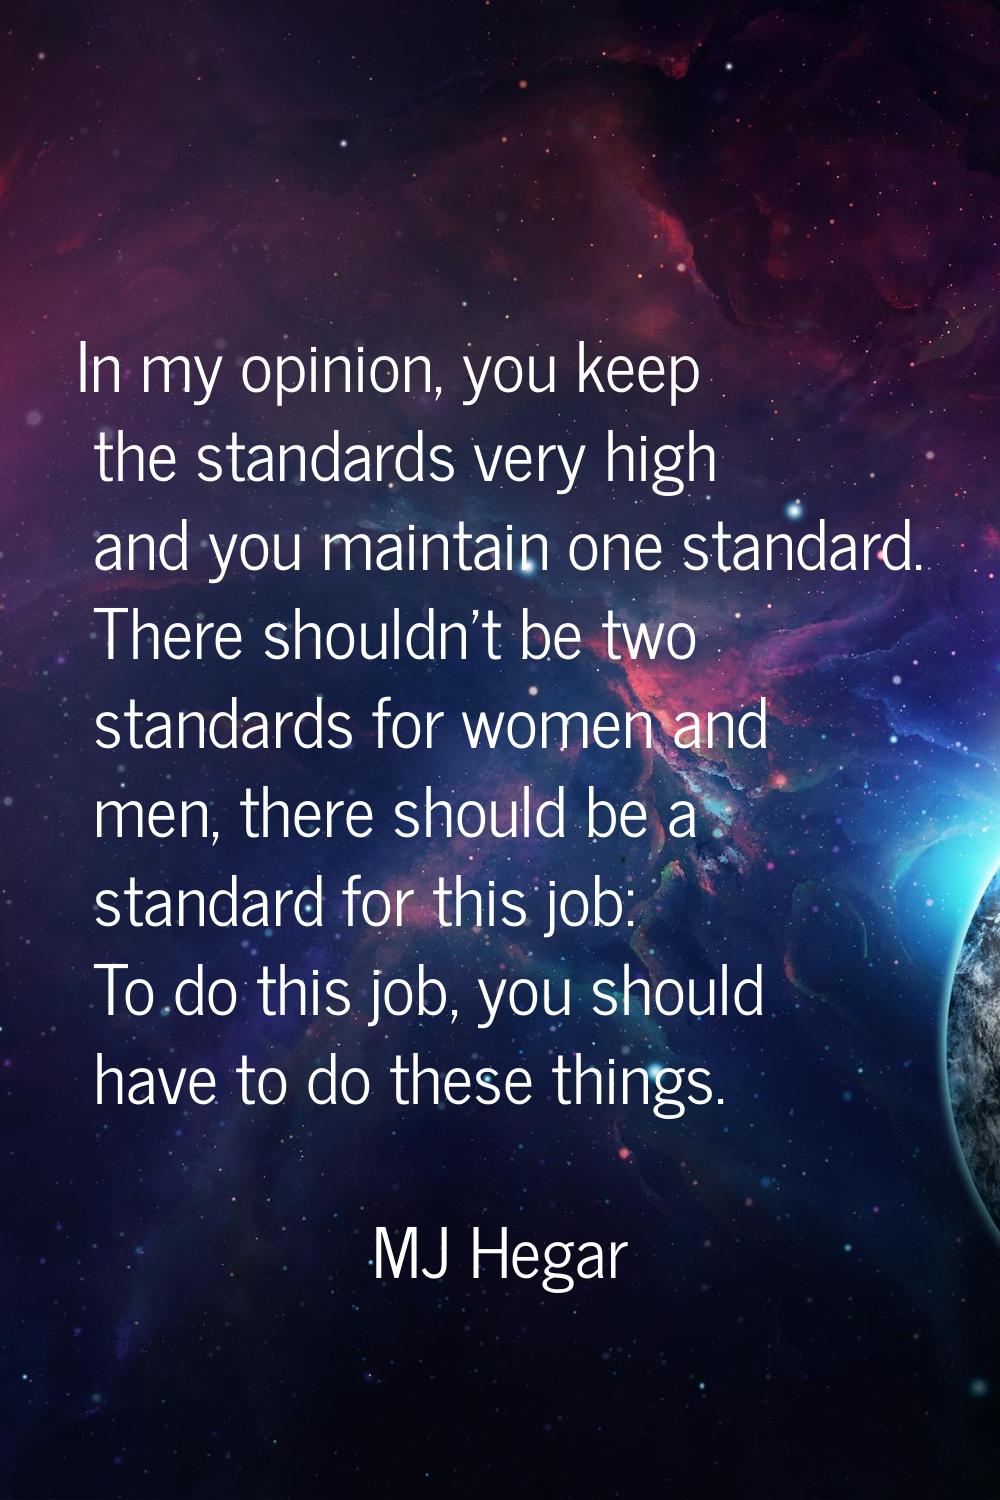 In my opinion, you keep the standards very high and you maintain one standard. There shouldn't be t